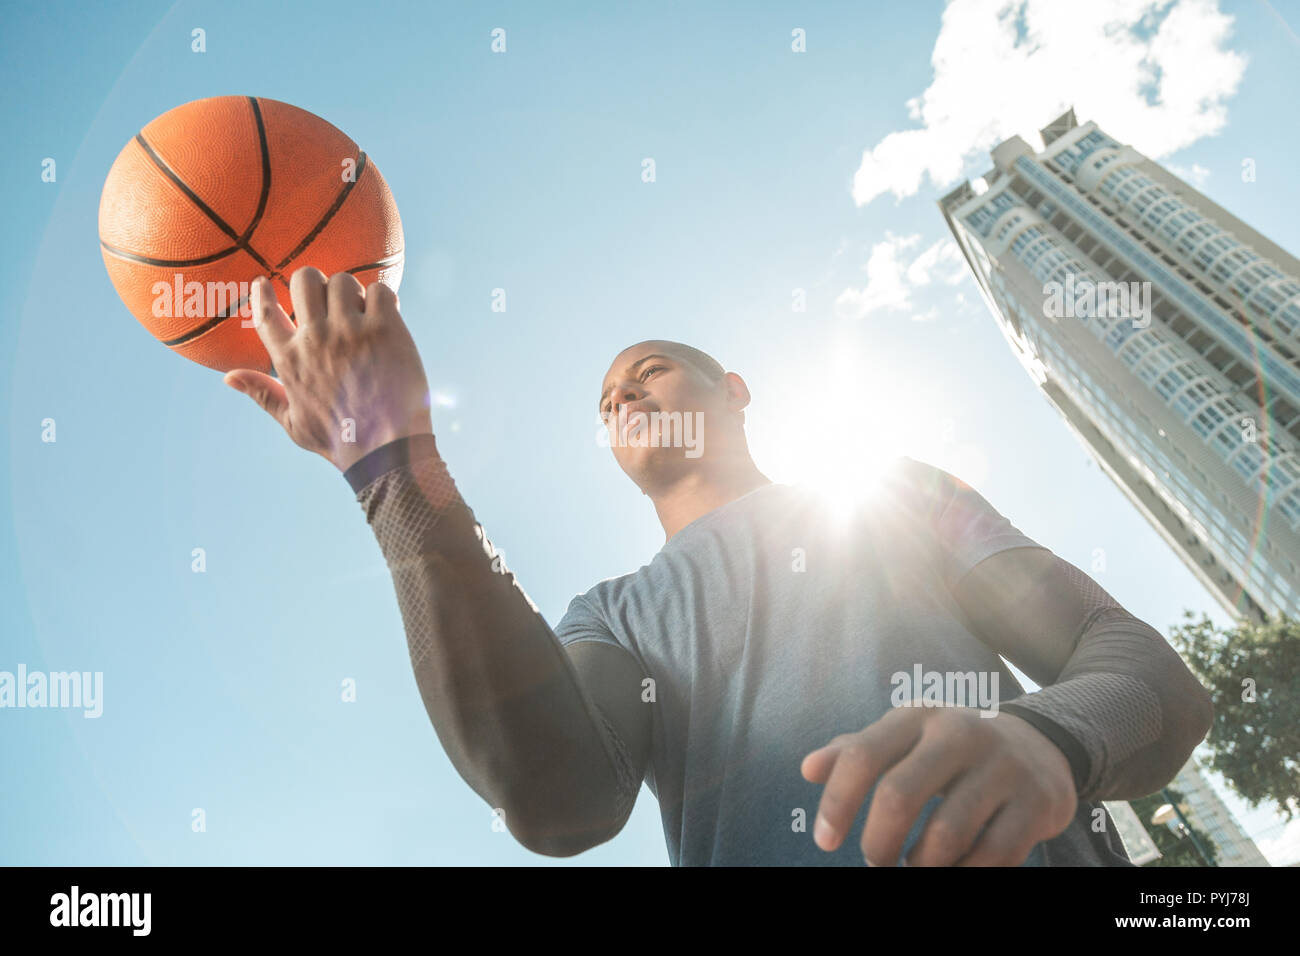 Low angle of a nice young man rotating the ball Stock Photo